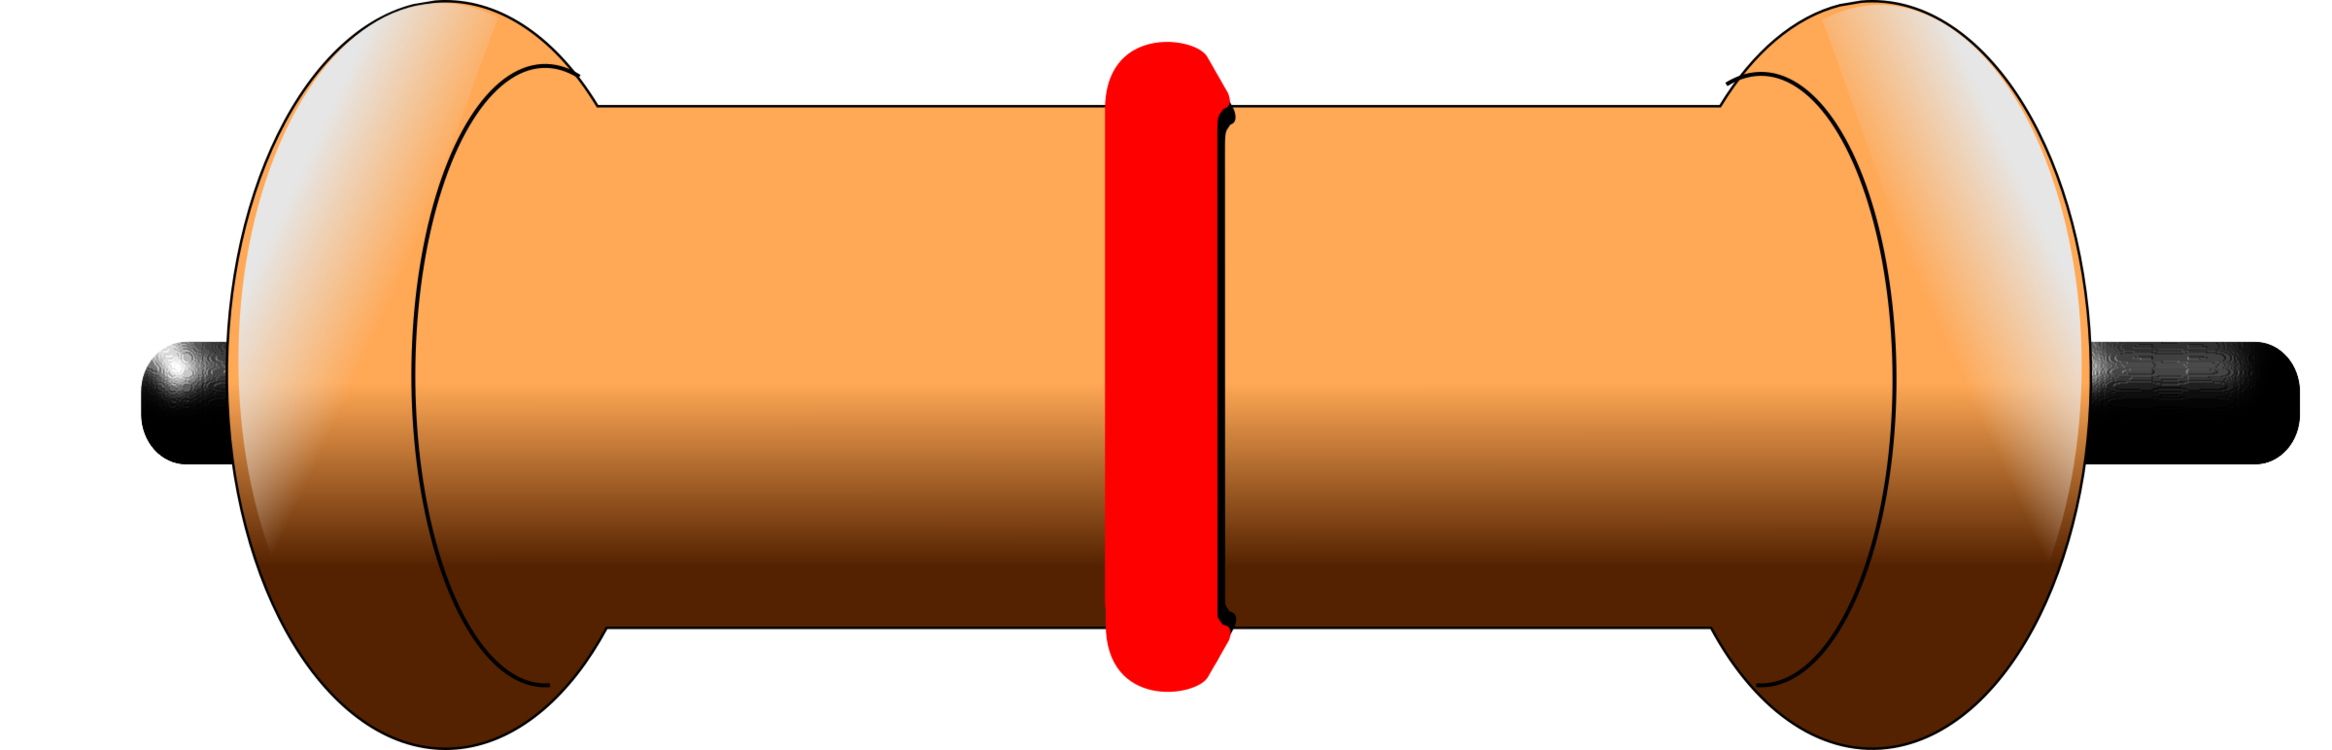 Angle,Material,Cylinder